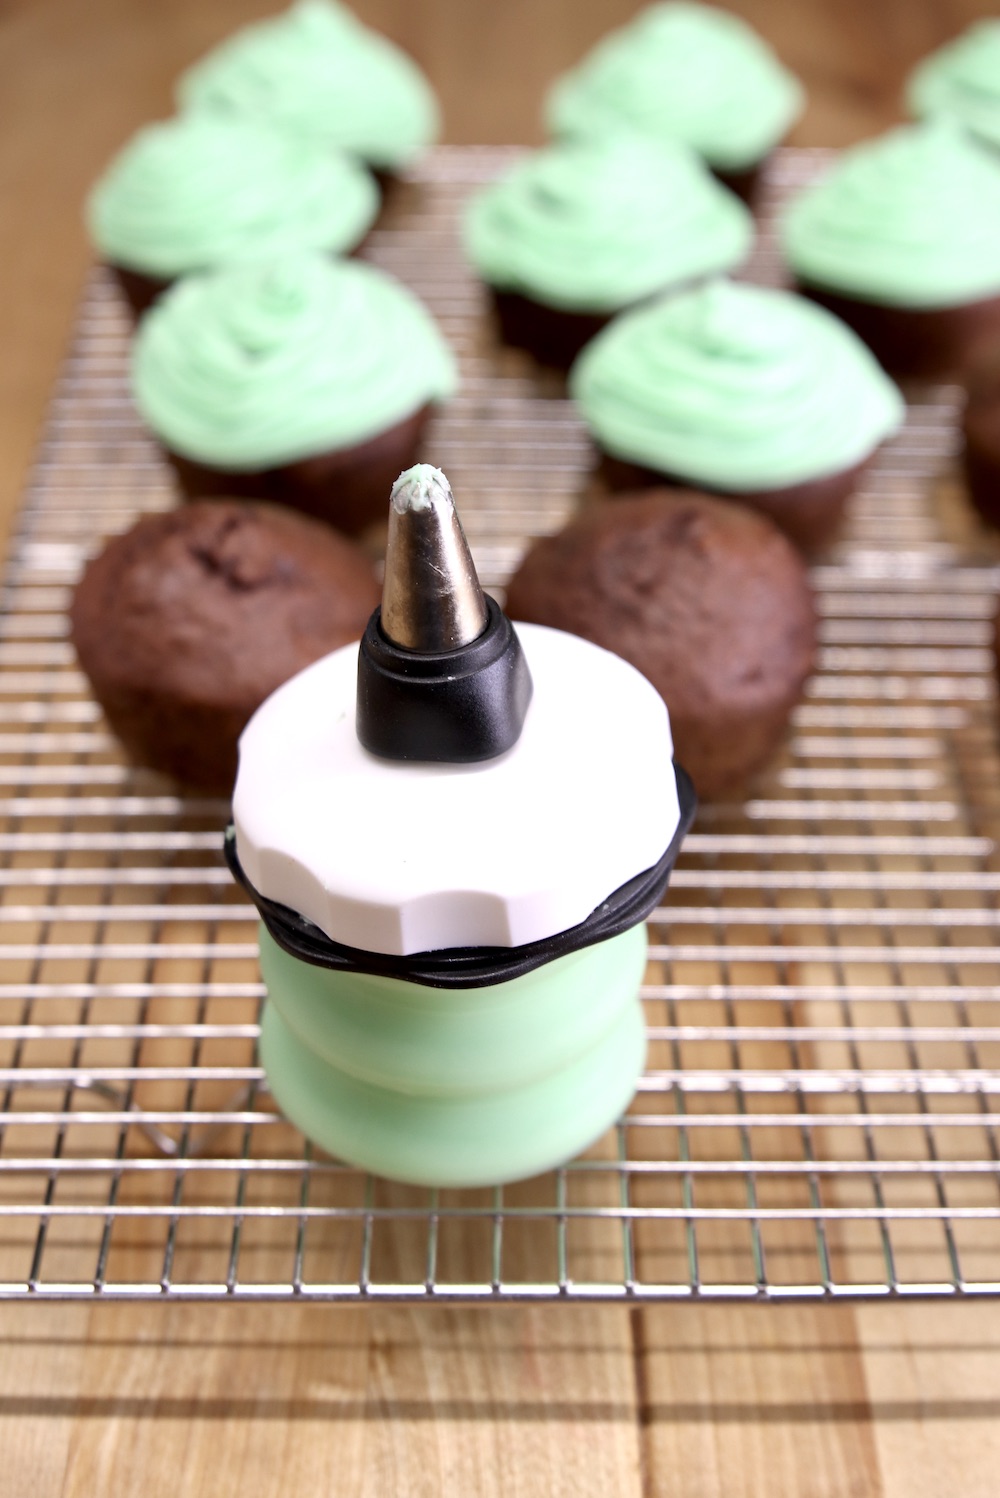 oxo decorator bottle for icing cupcakes, cupcakes in background